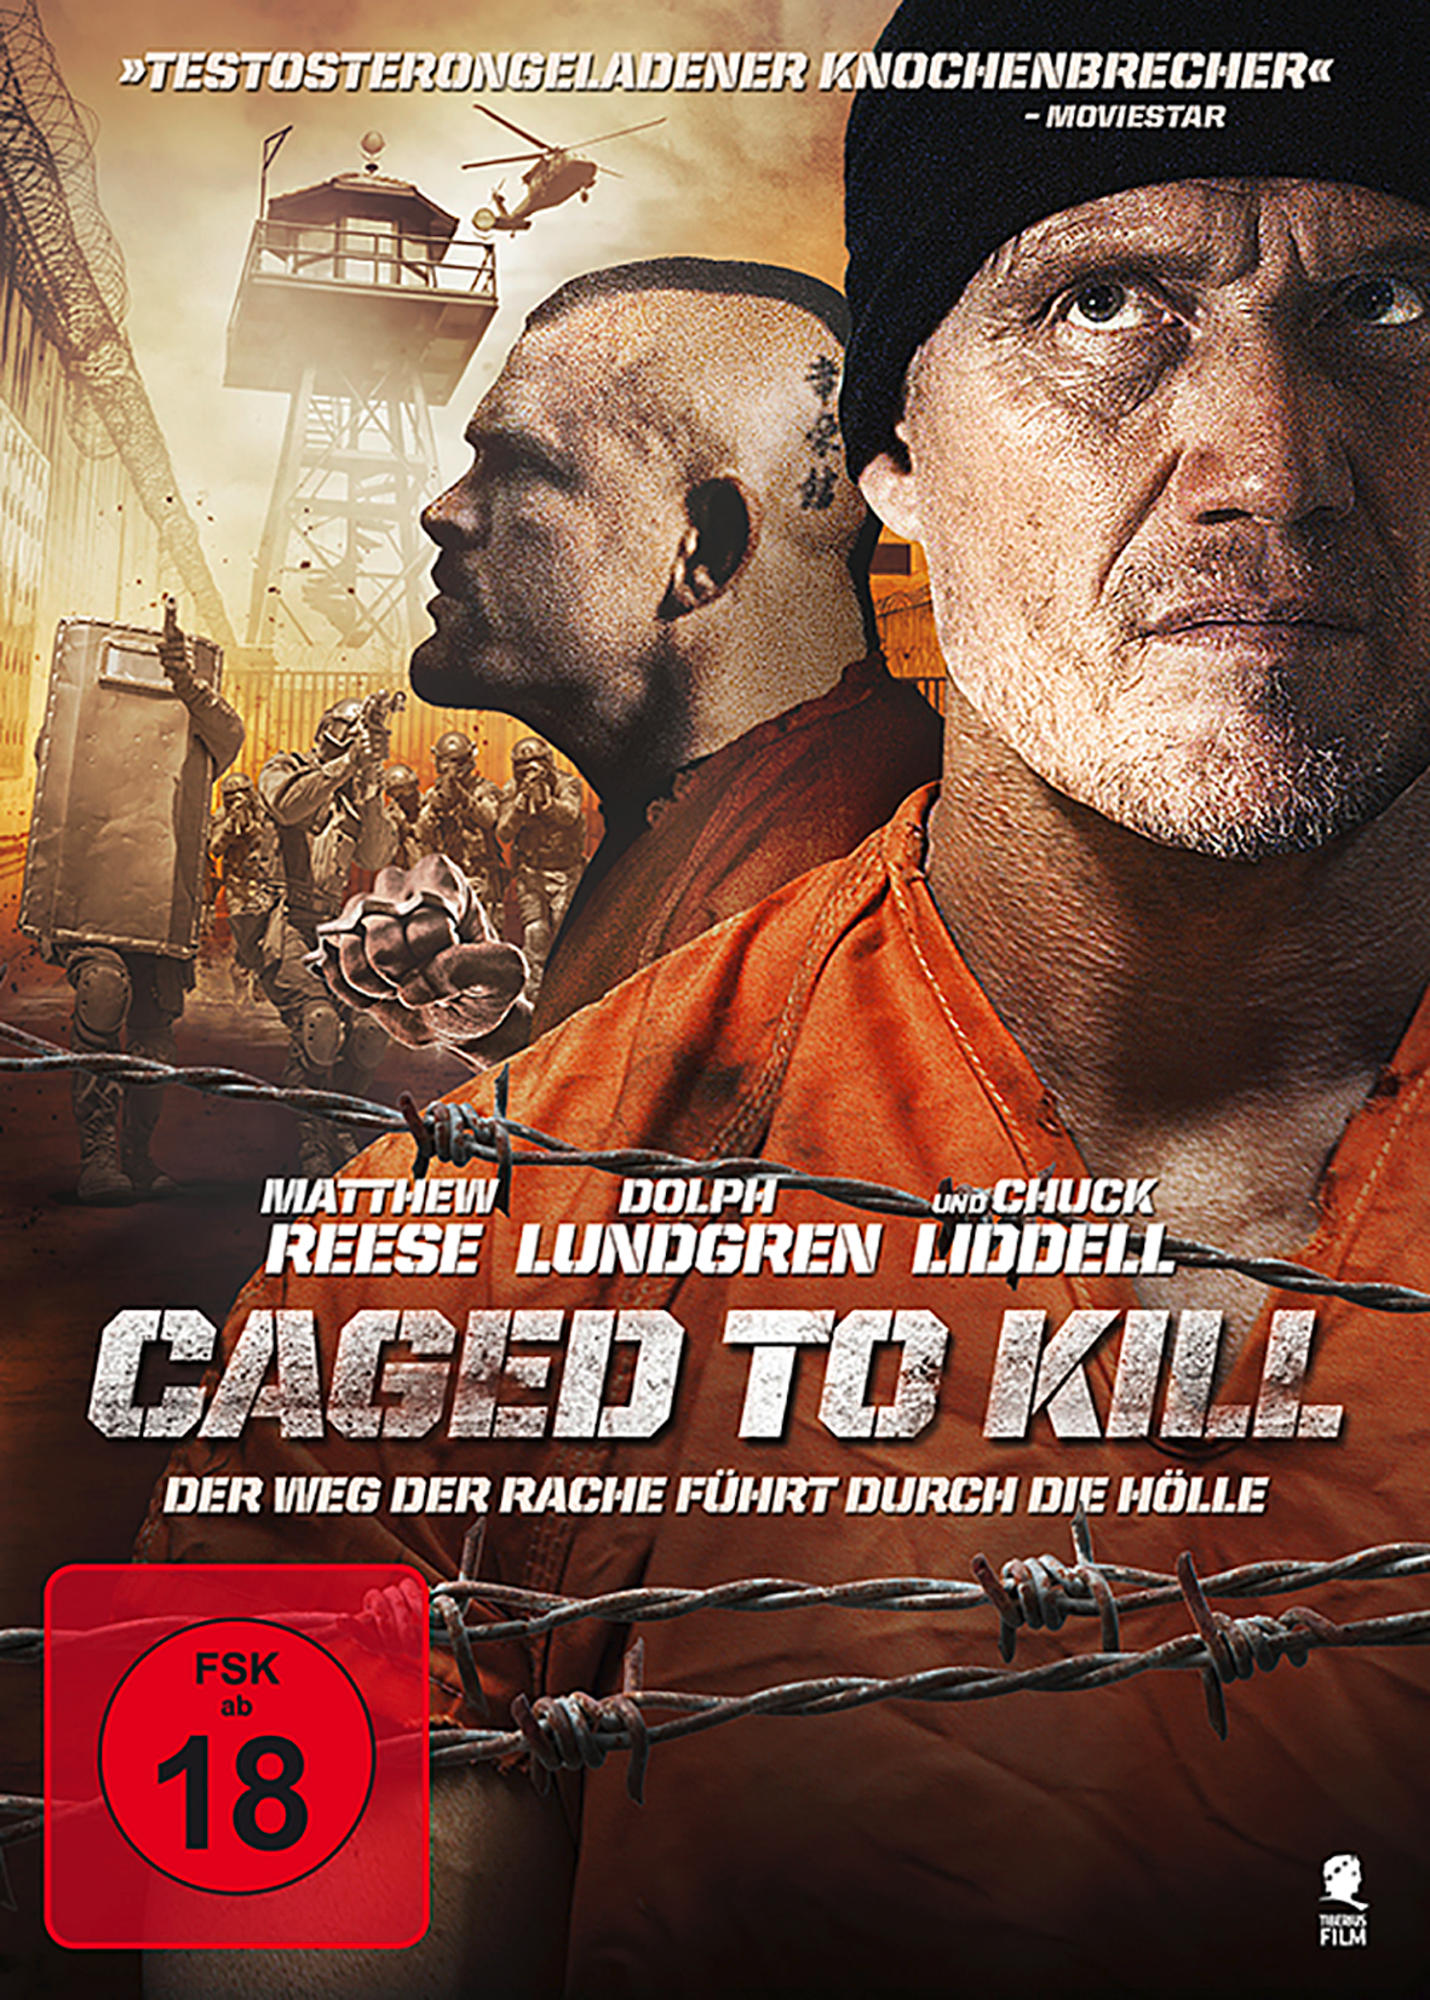 Kill DVD To Caged